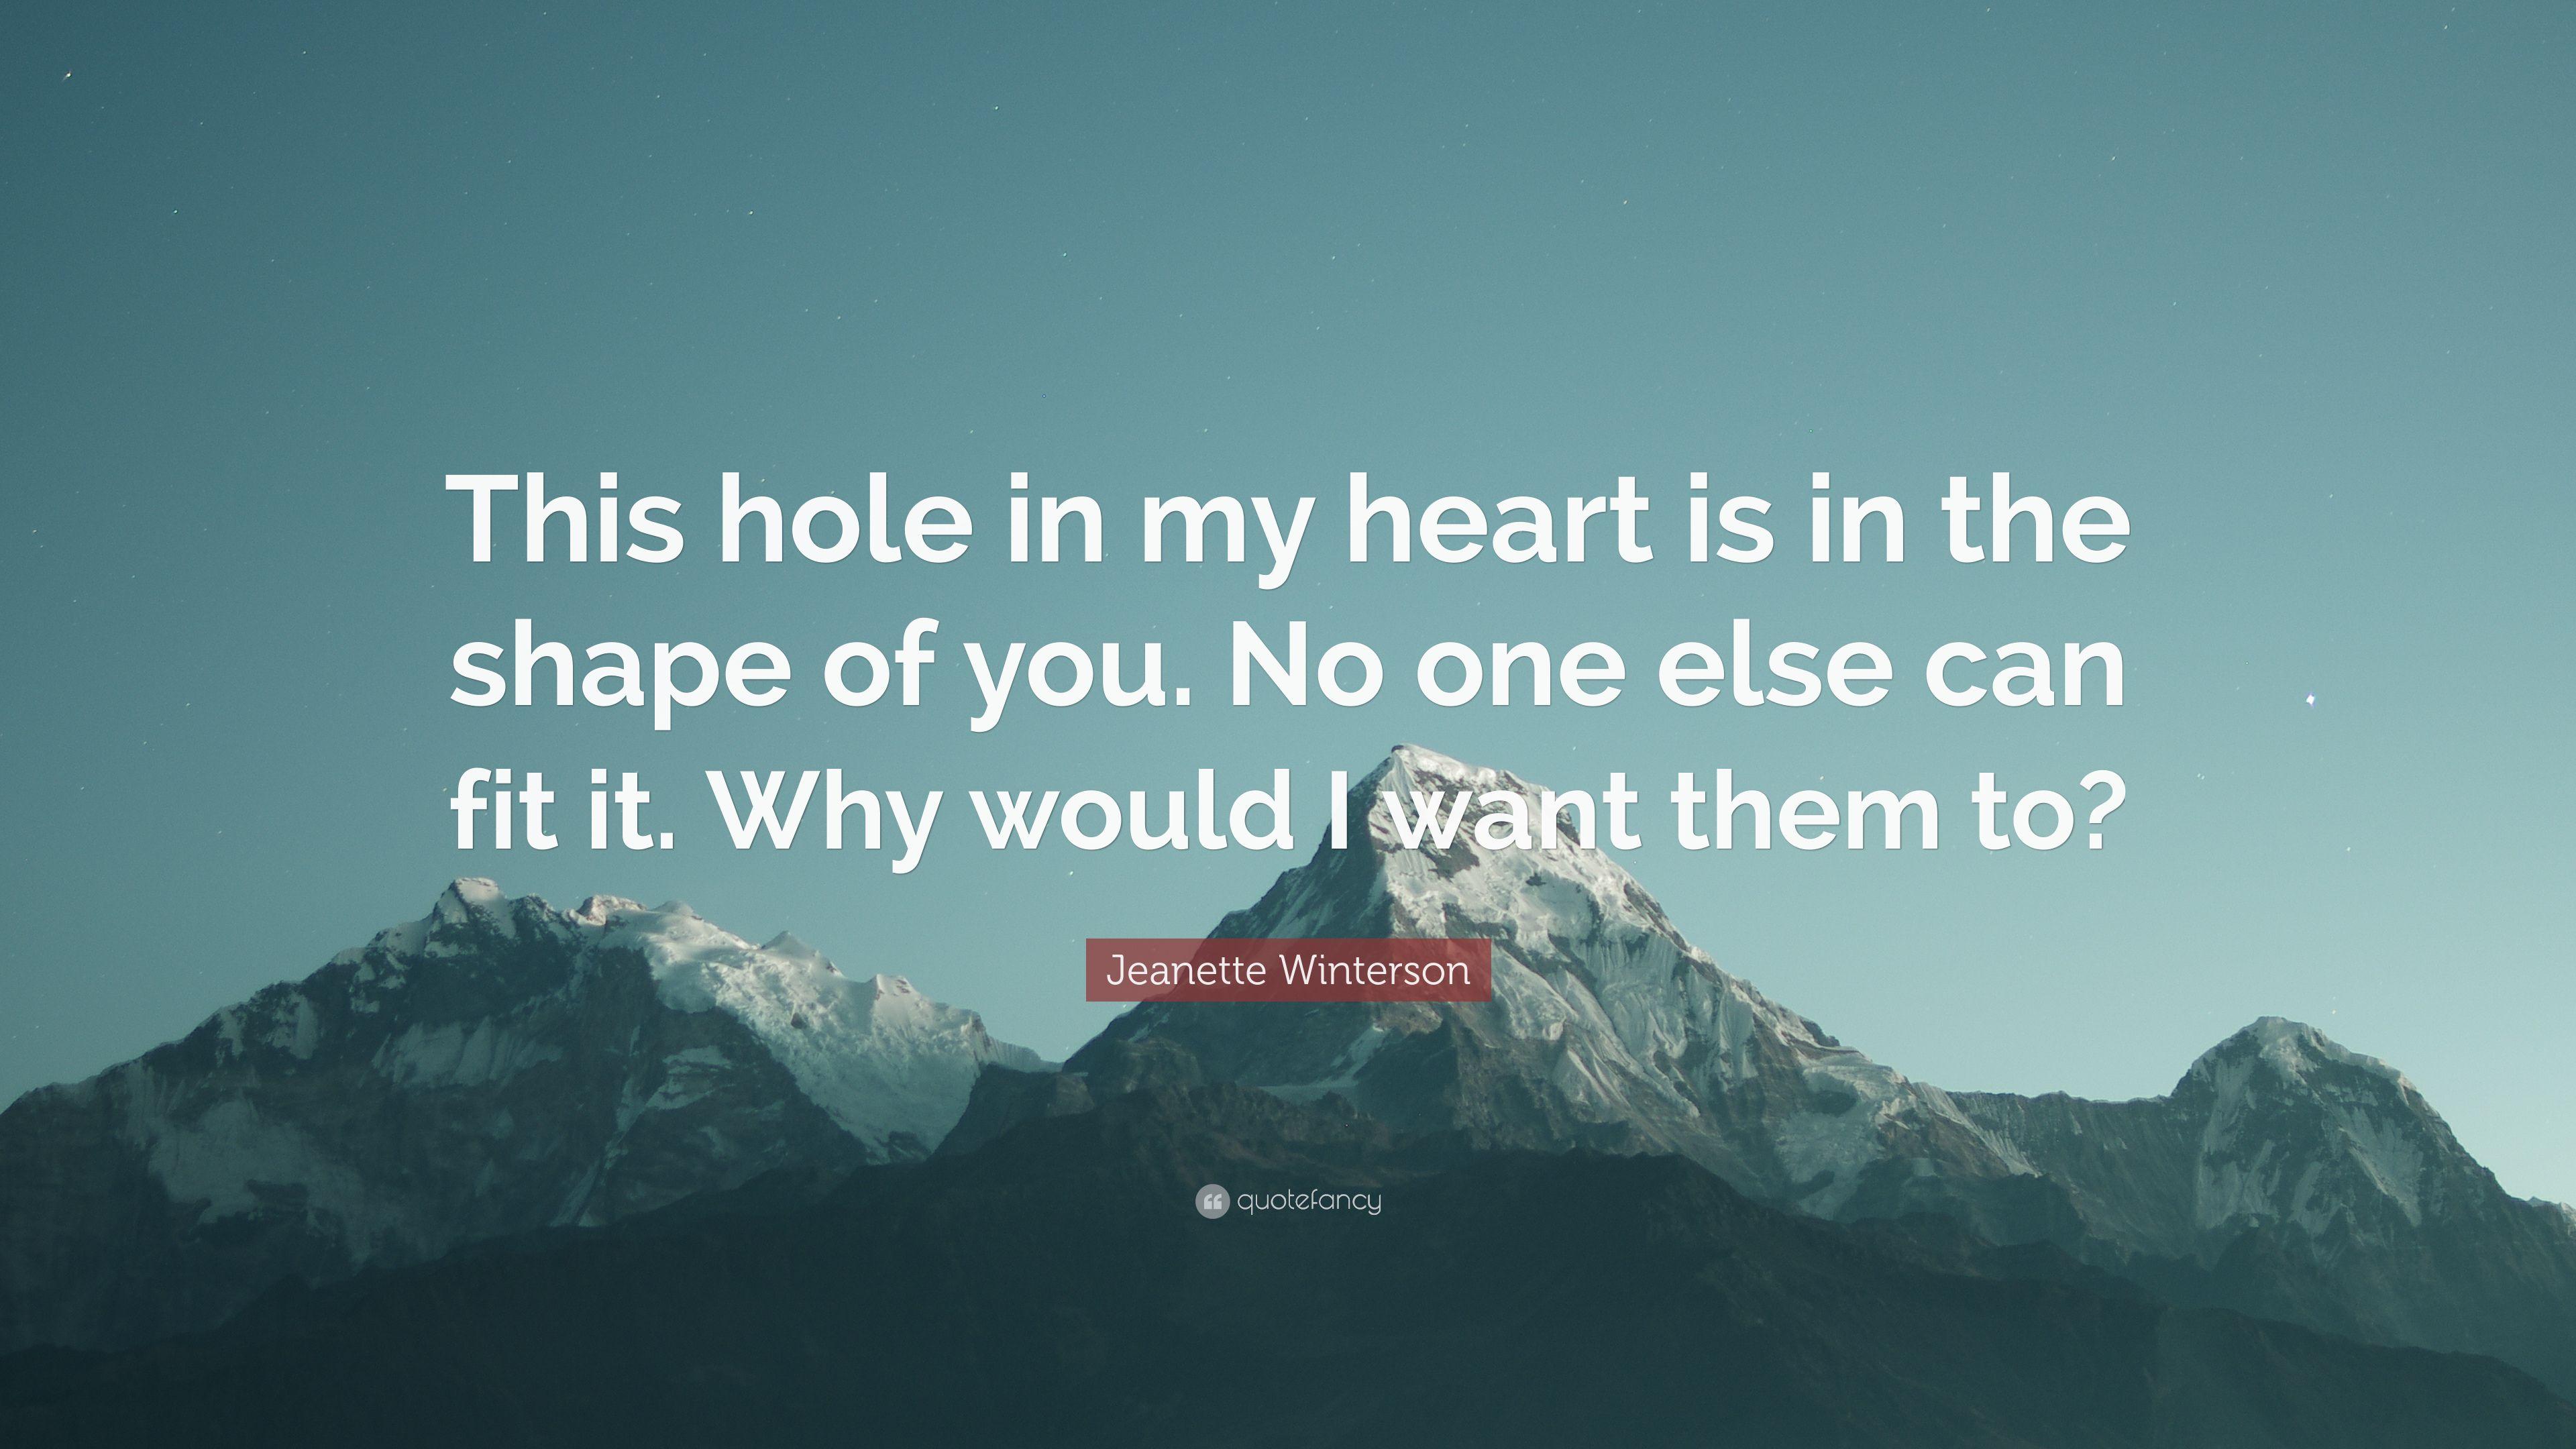 Jeanette Winterson Quote: “This hole in my heart is in the shape